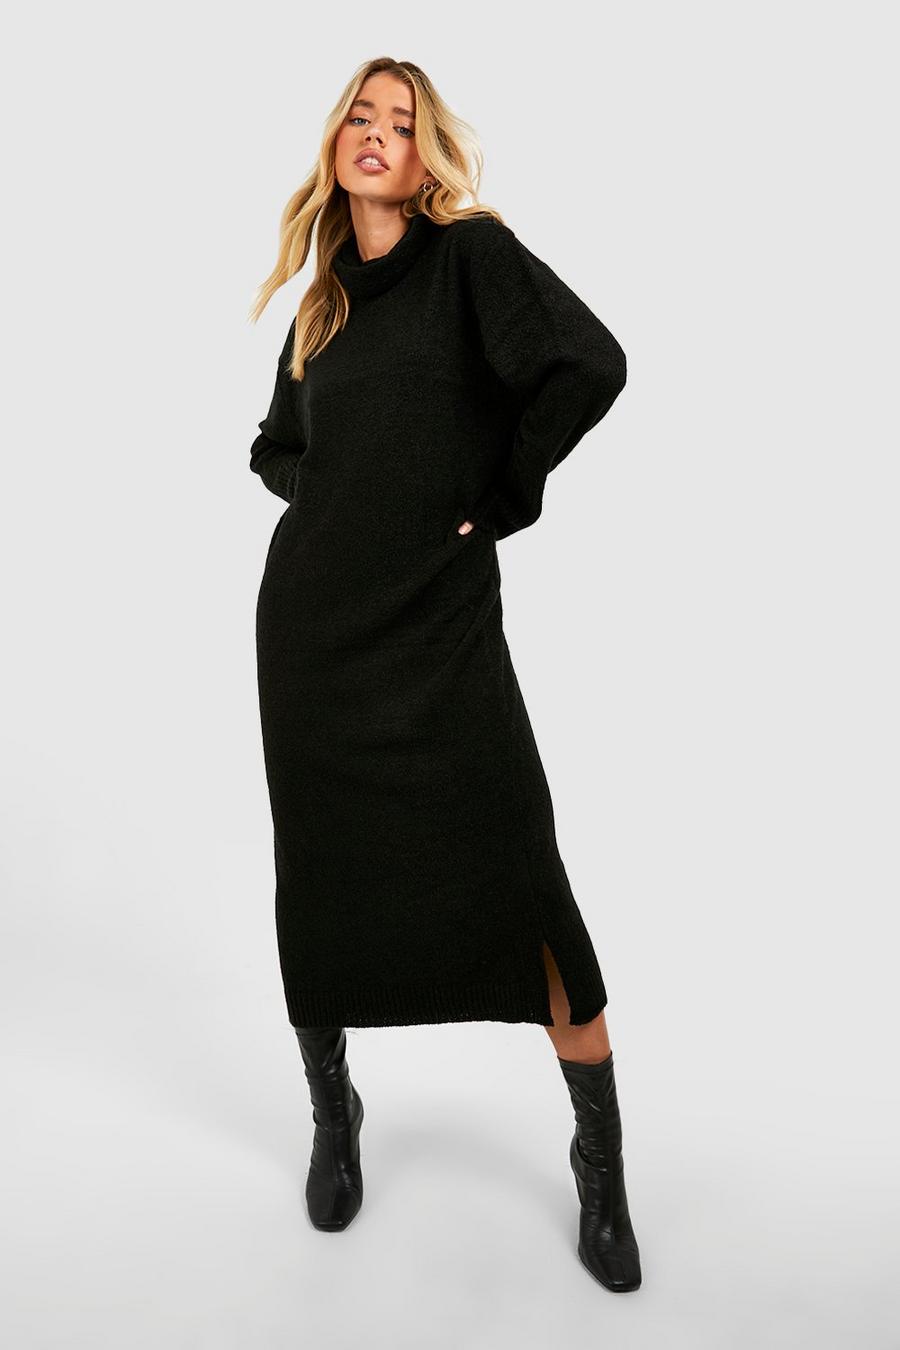 Black Cowl Neck Midaxi Knitted Dress